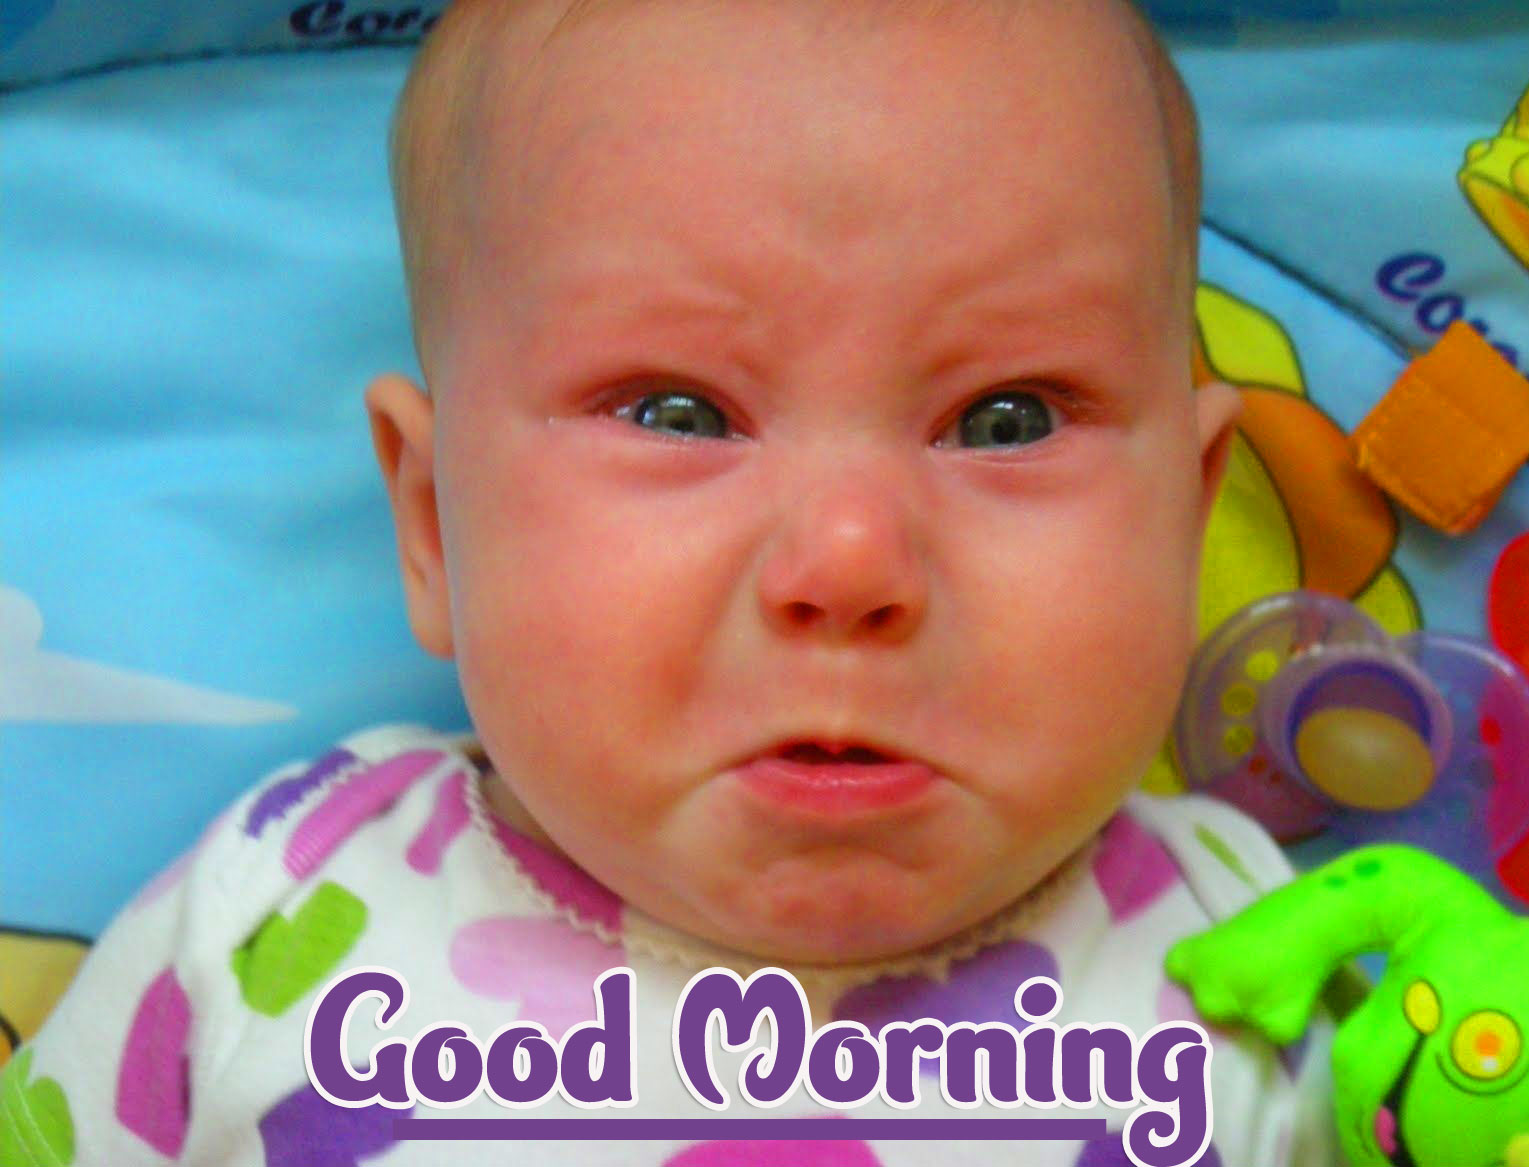 Funny Good Morning Wishes Wallpaper pics Download 